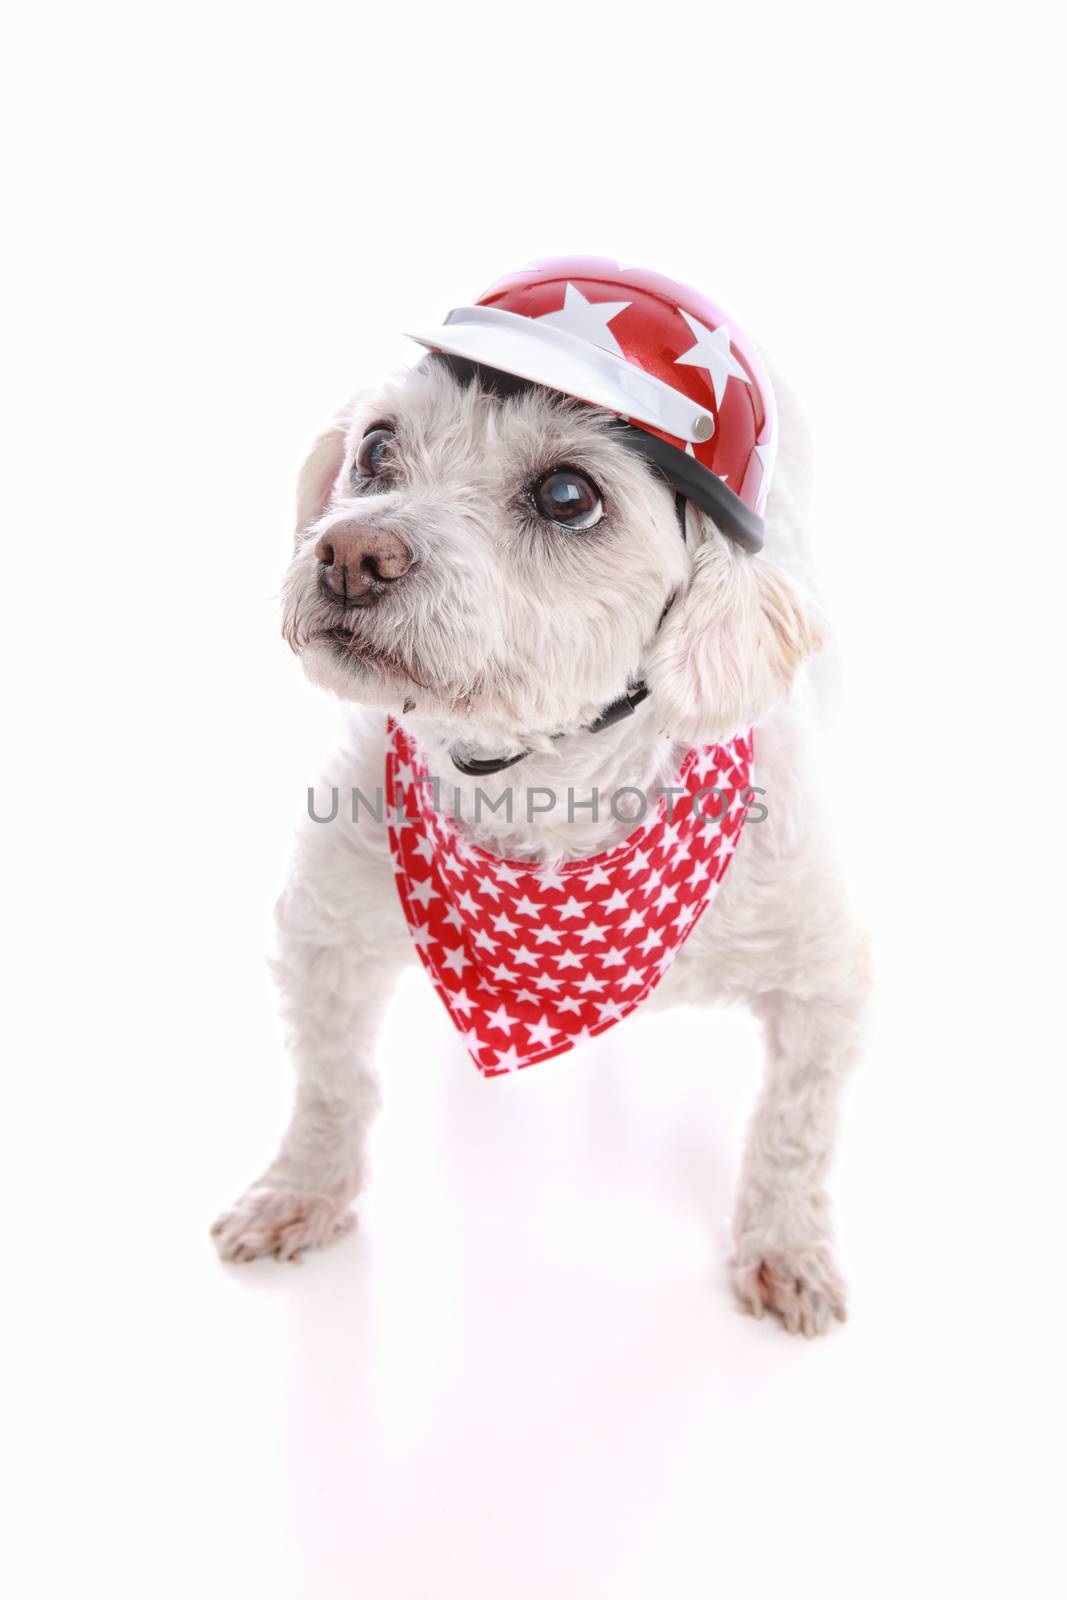 A small tough dog wearing a bike helmet and red bandana with stars.  White background.